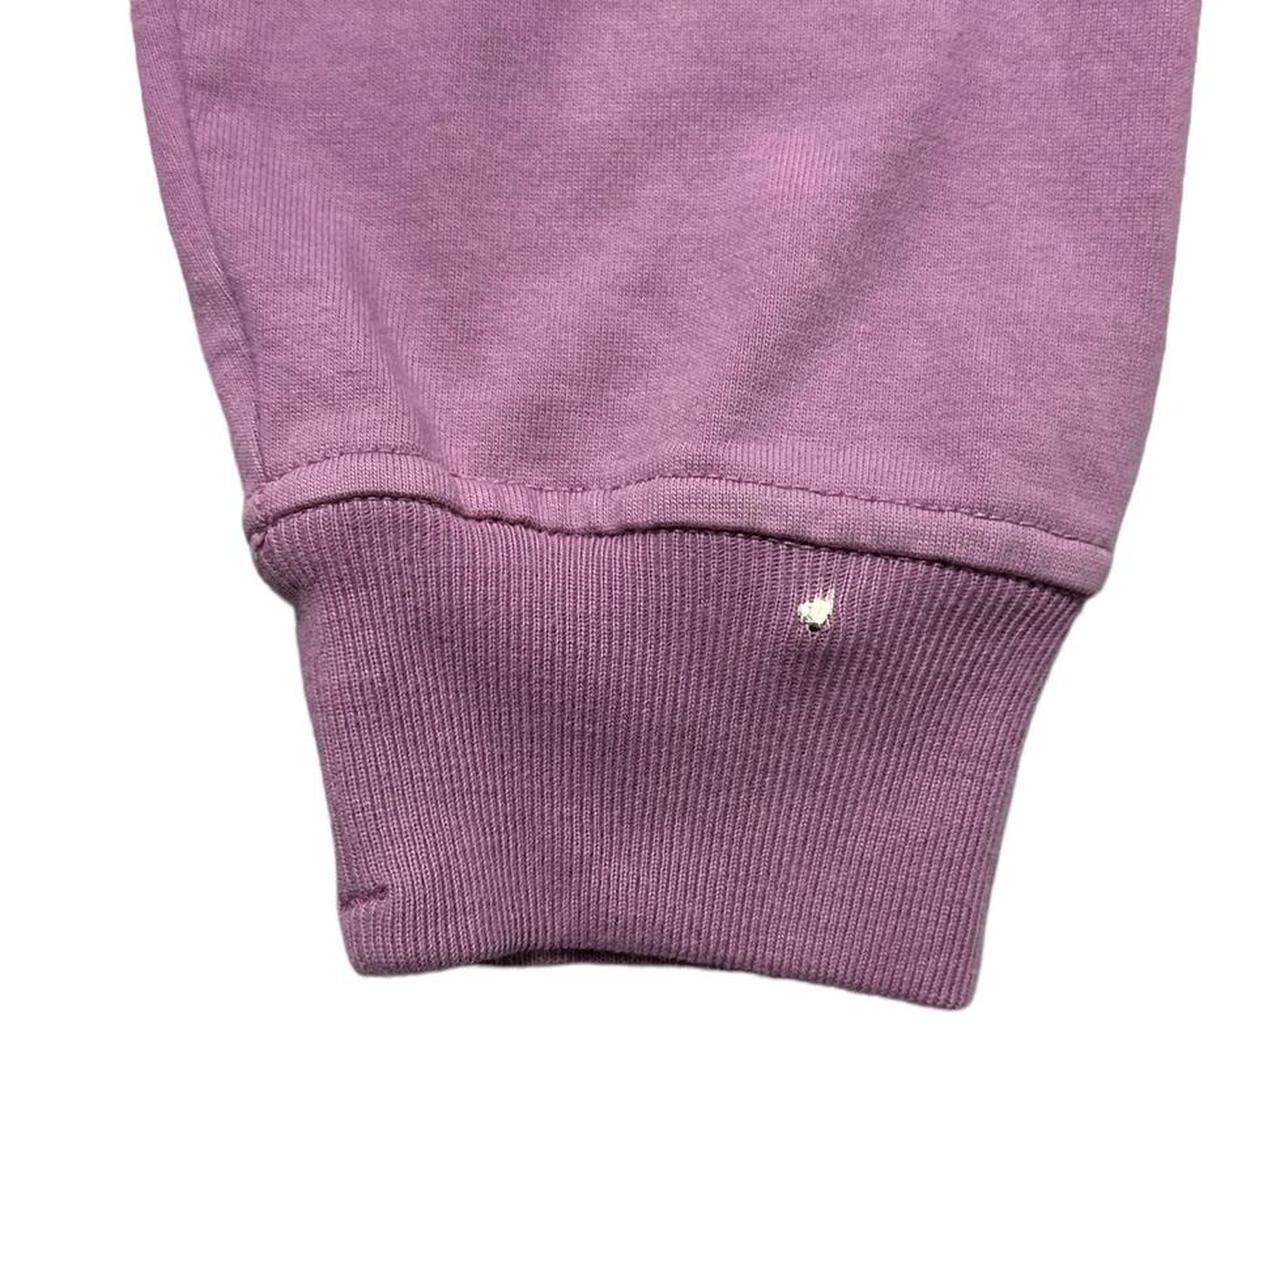 Stone Island Pink Pullover Crewneck - Known Source